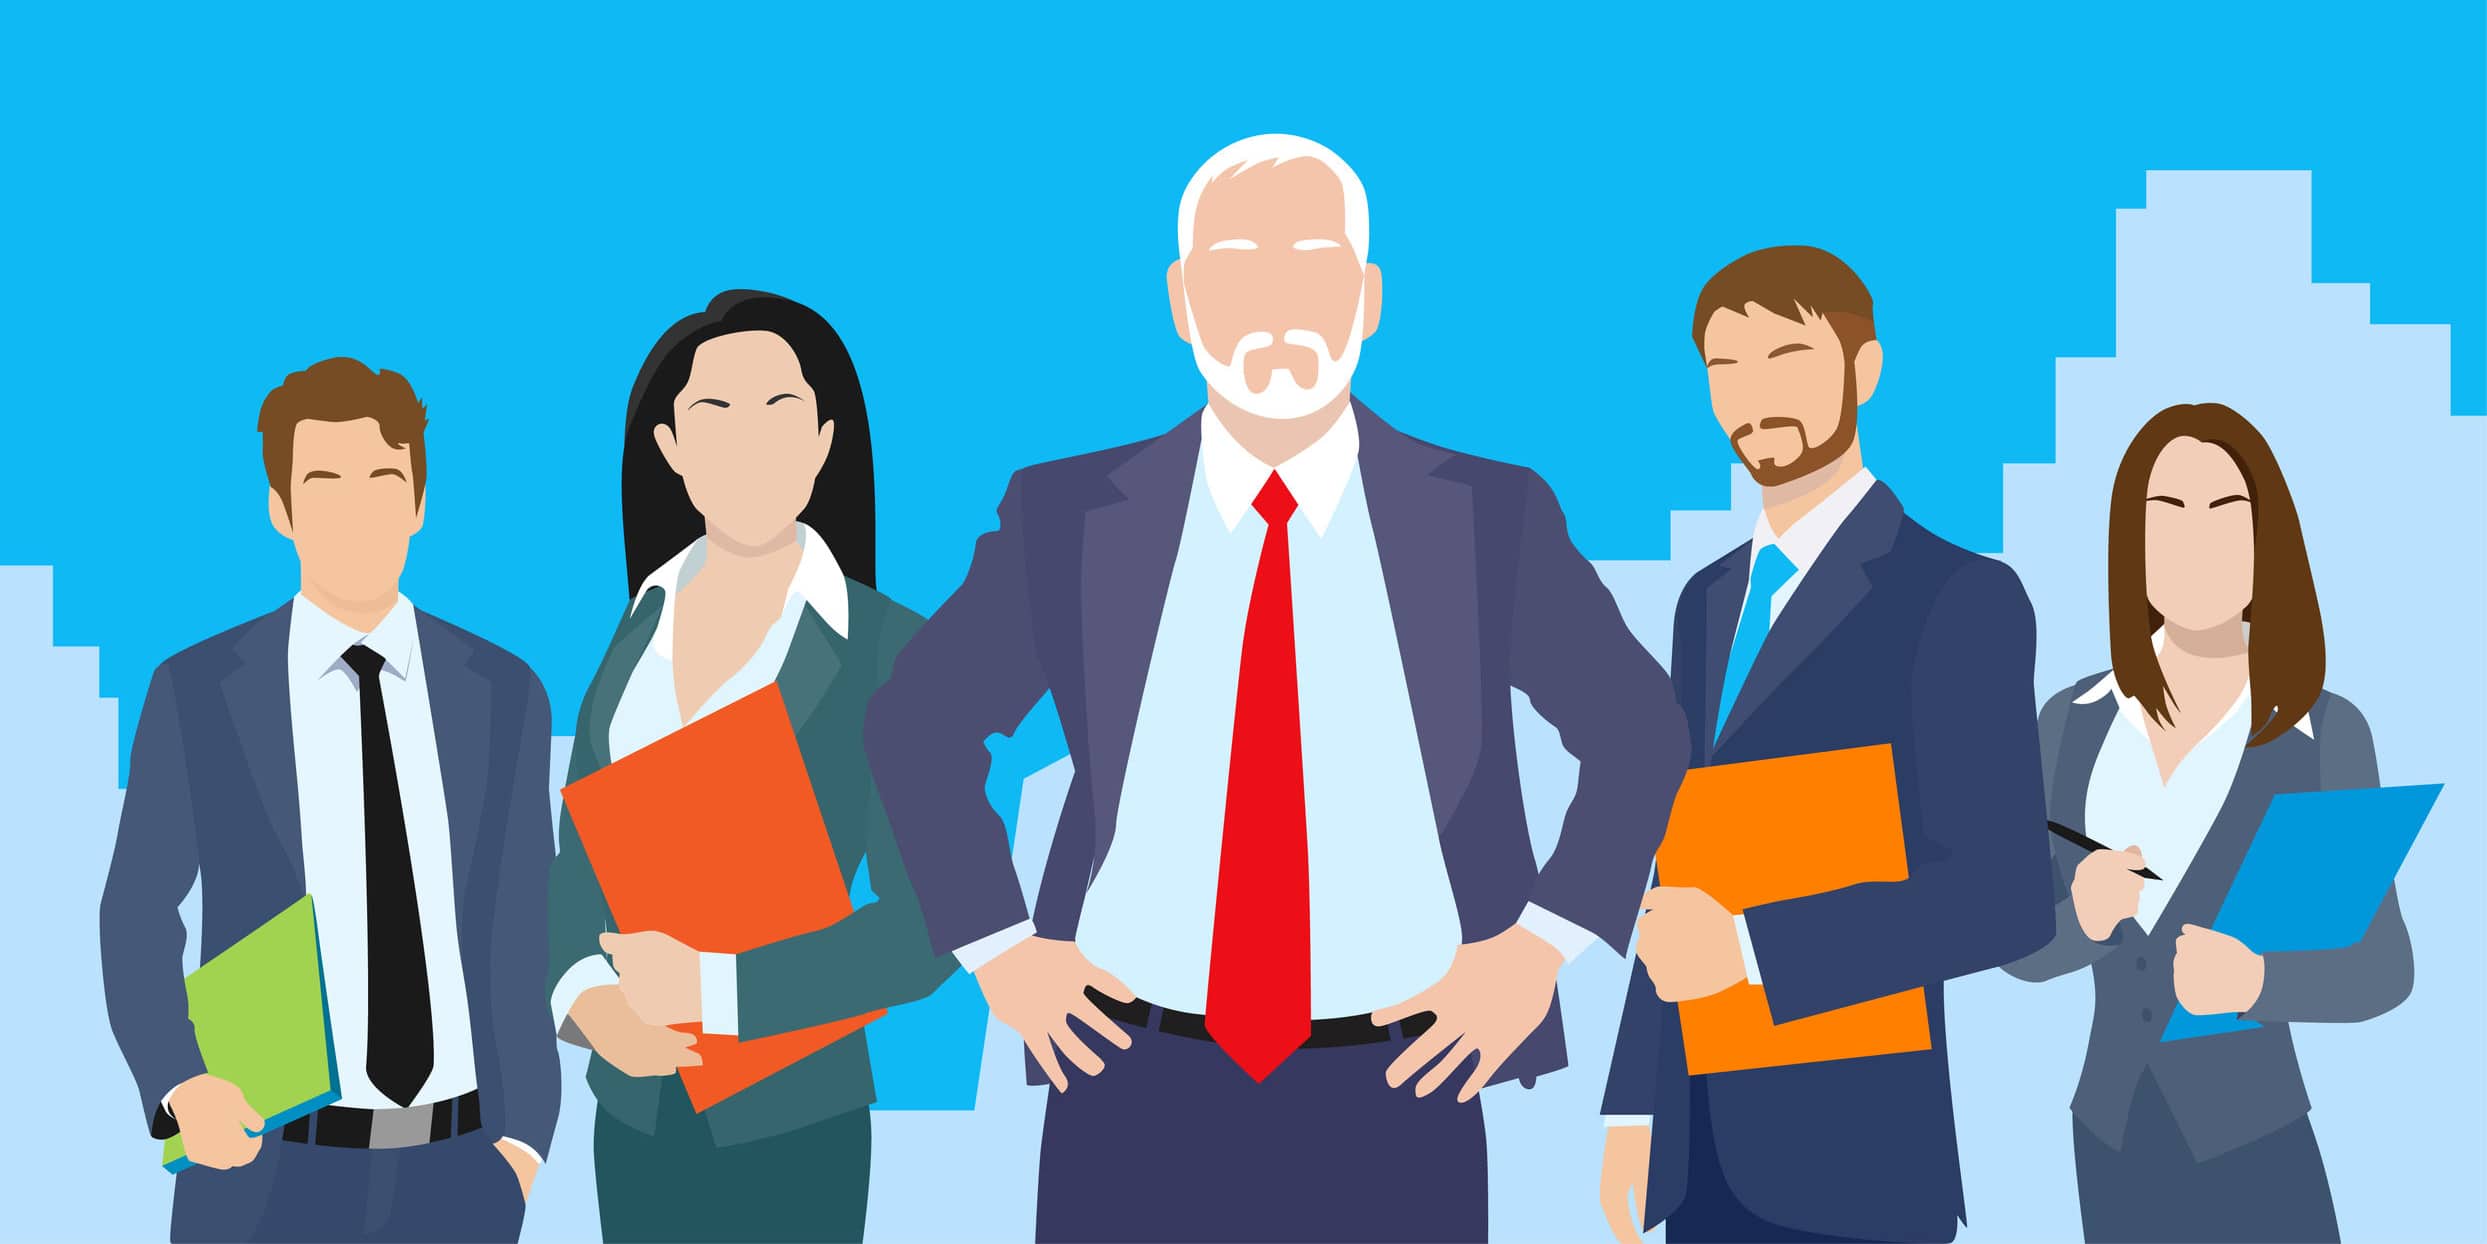 Business Allies good networking animated illustration